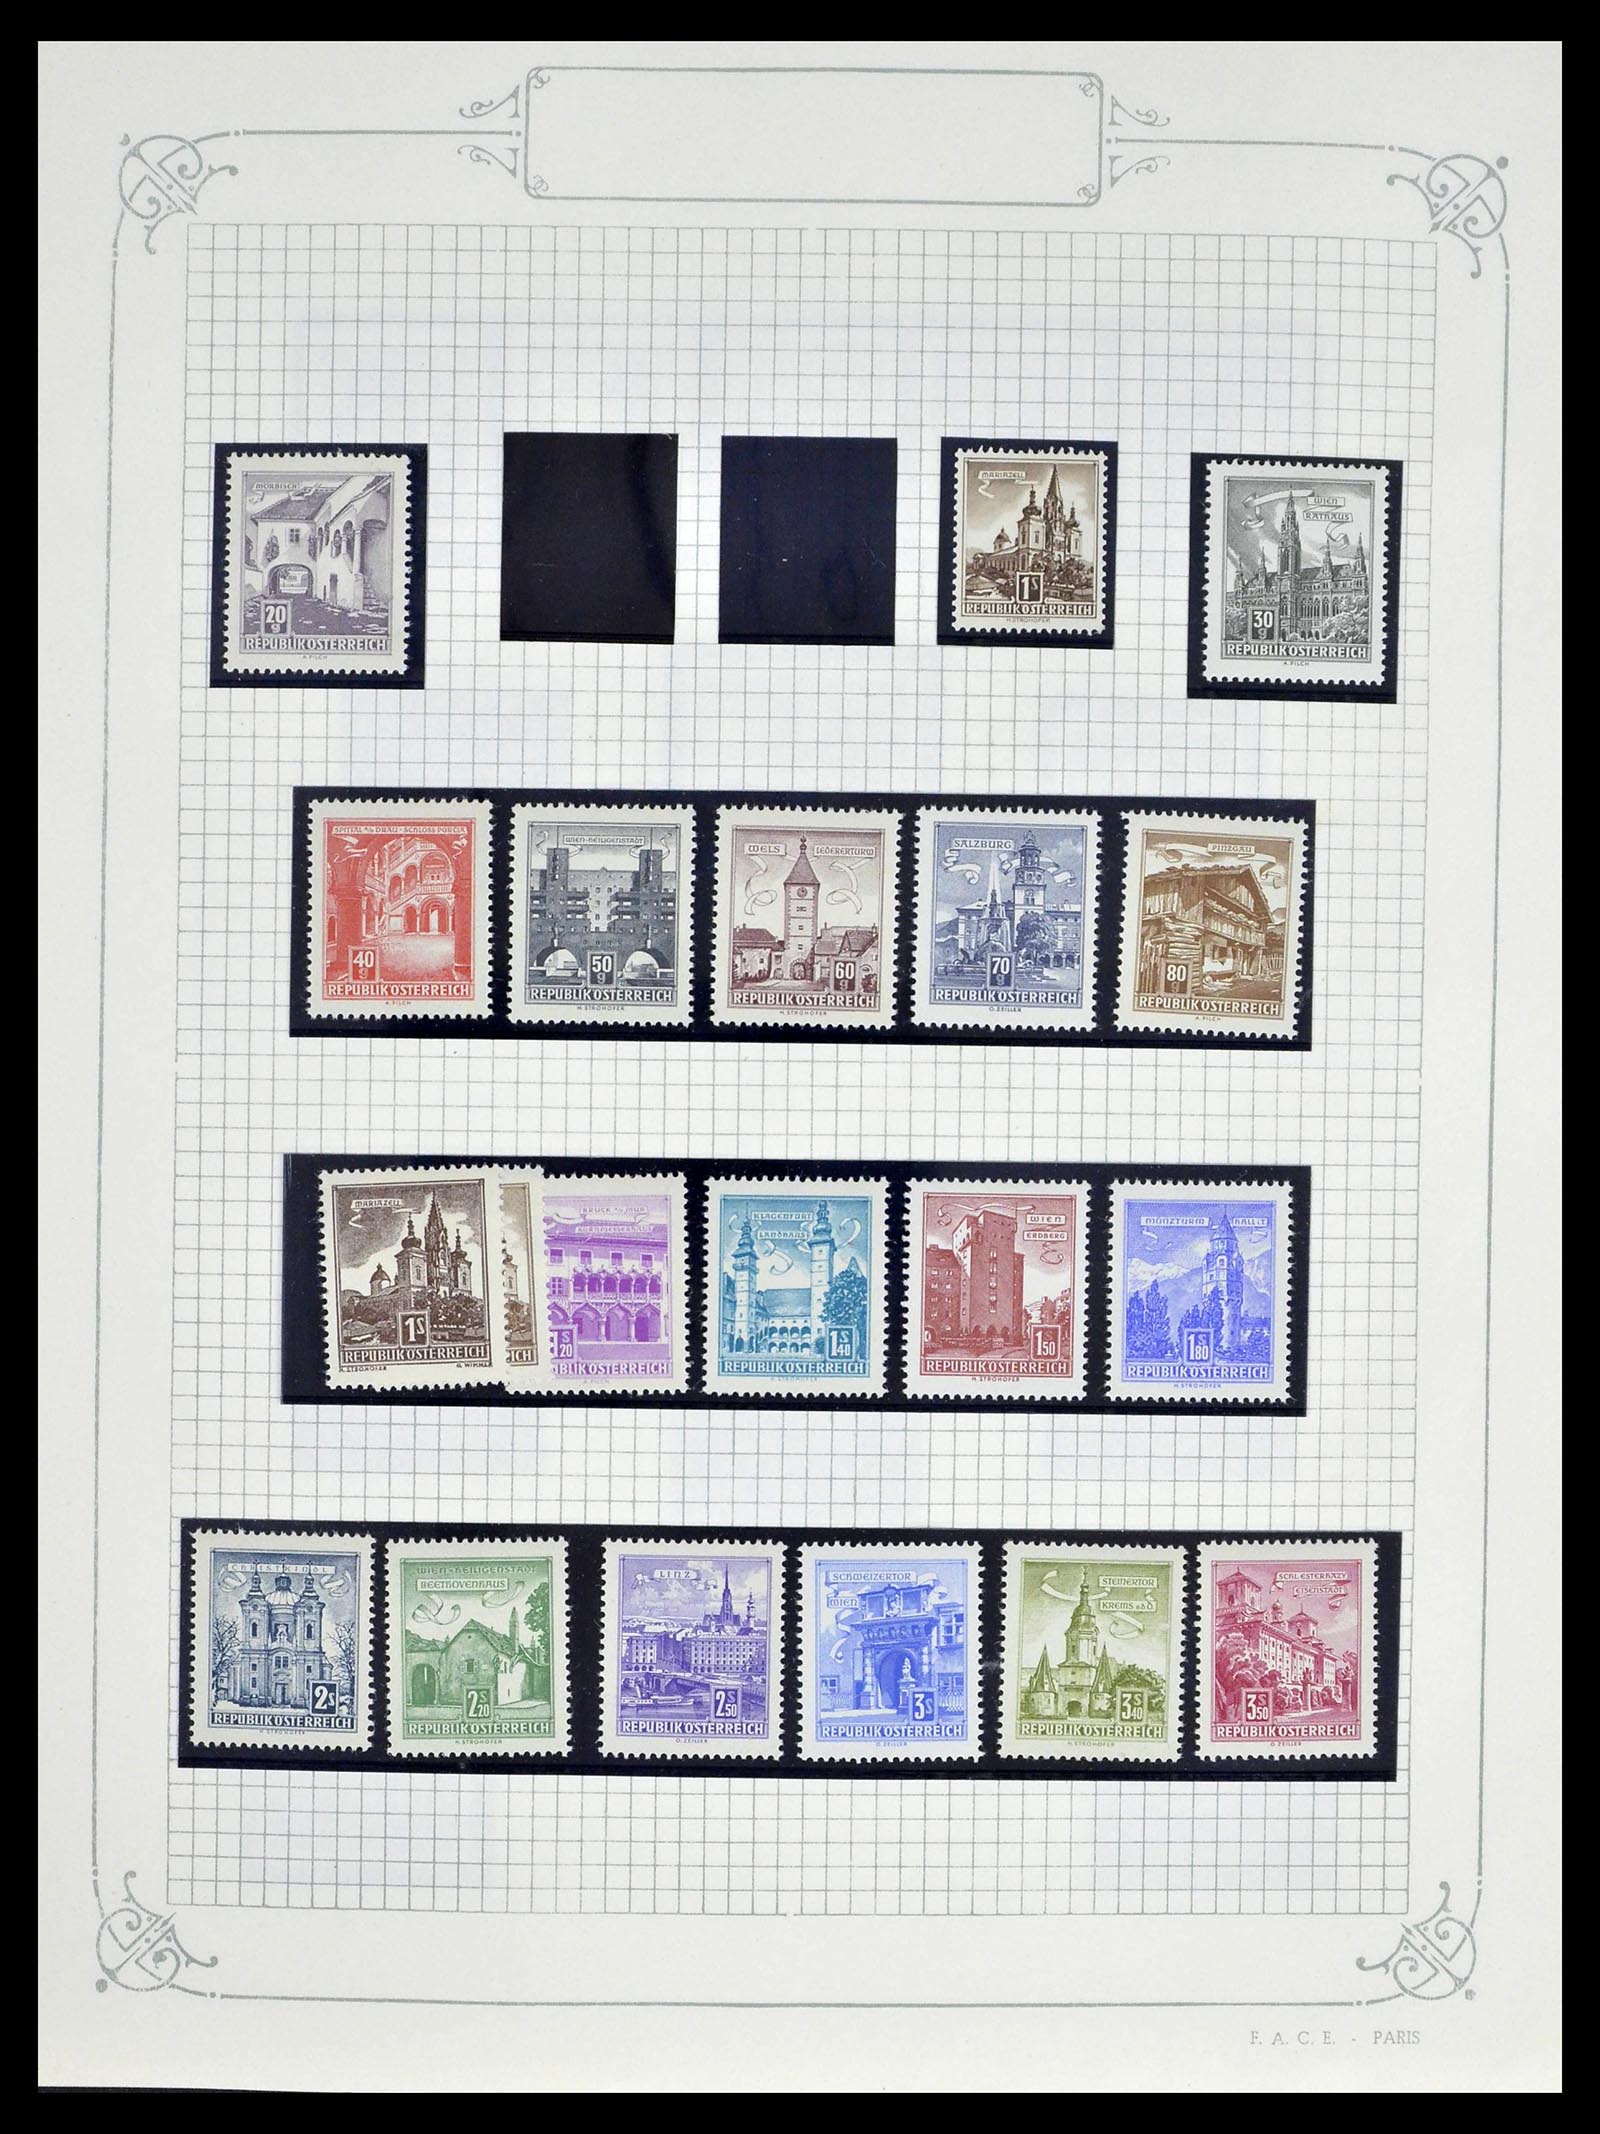 39276 0057 - Stamp collection 39276 Austria and territories 1850-1979.